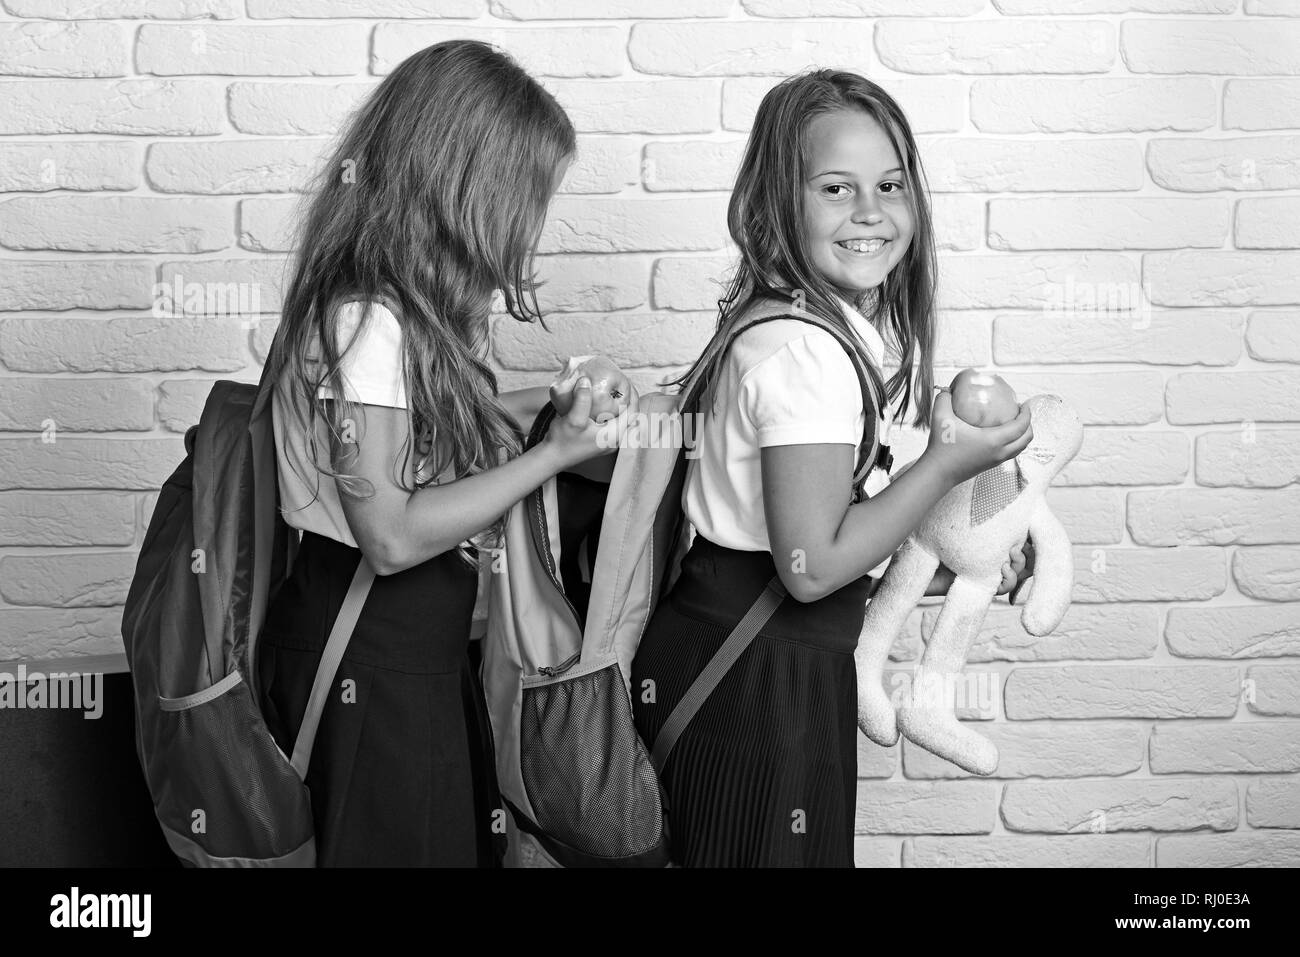 education of children and people concept - happy kids or students with book in backpack. Stock Photo